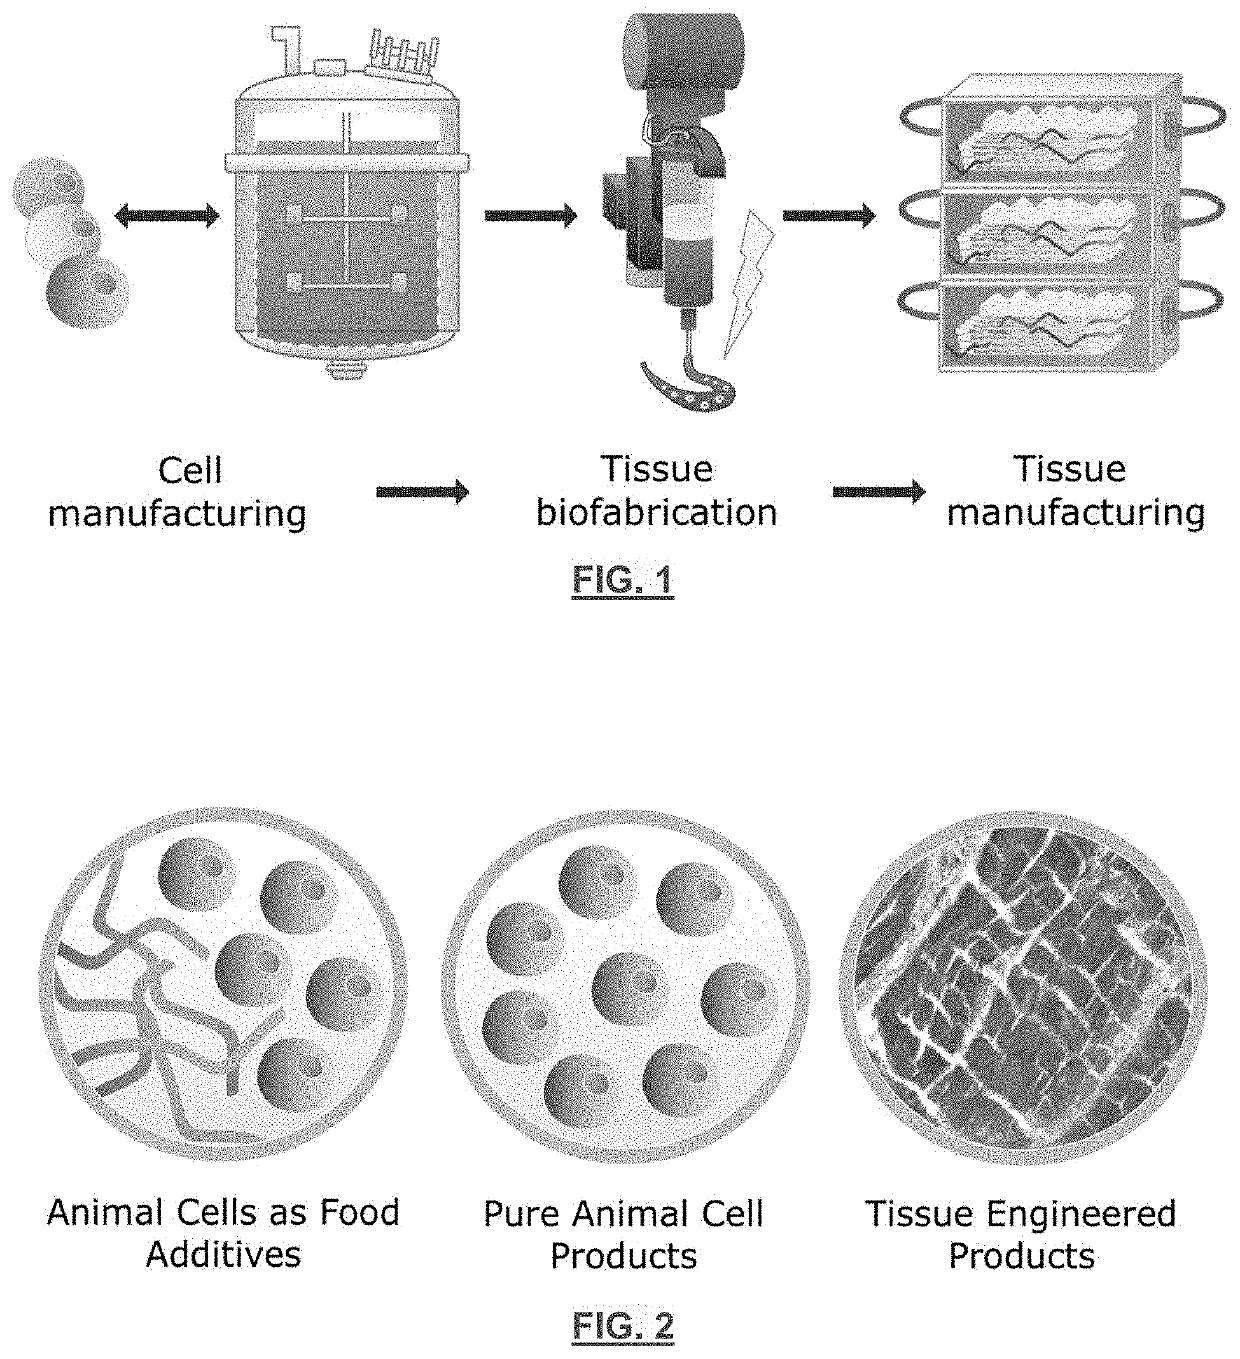 Animal cell lines for foods containing cultured animal cells